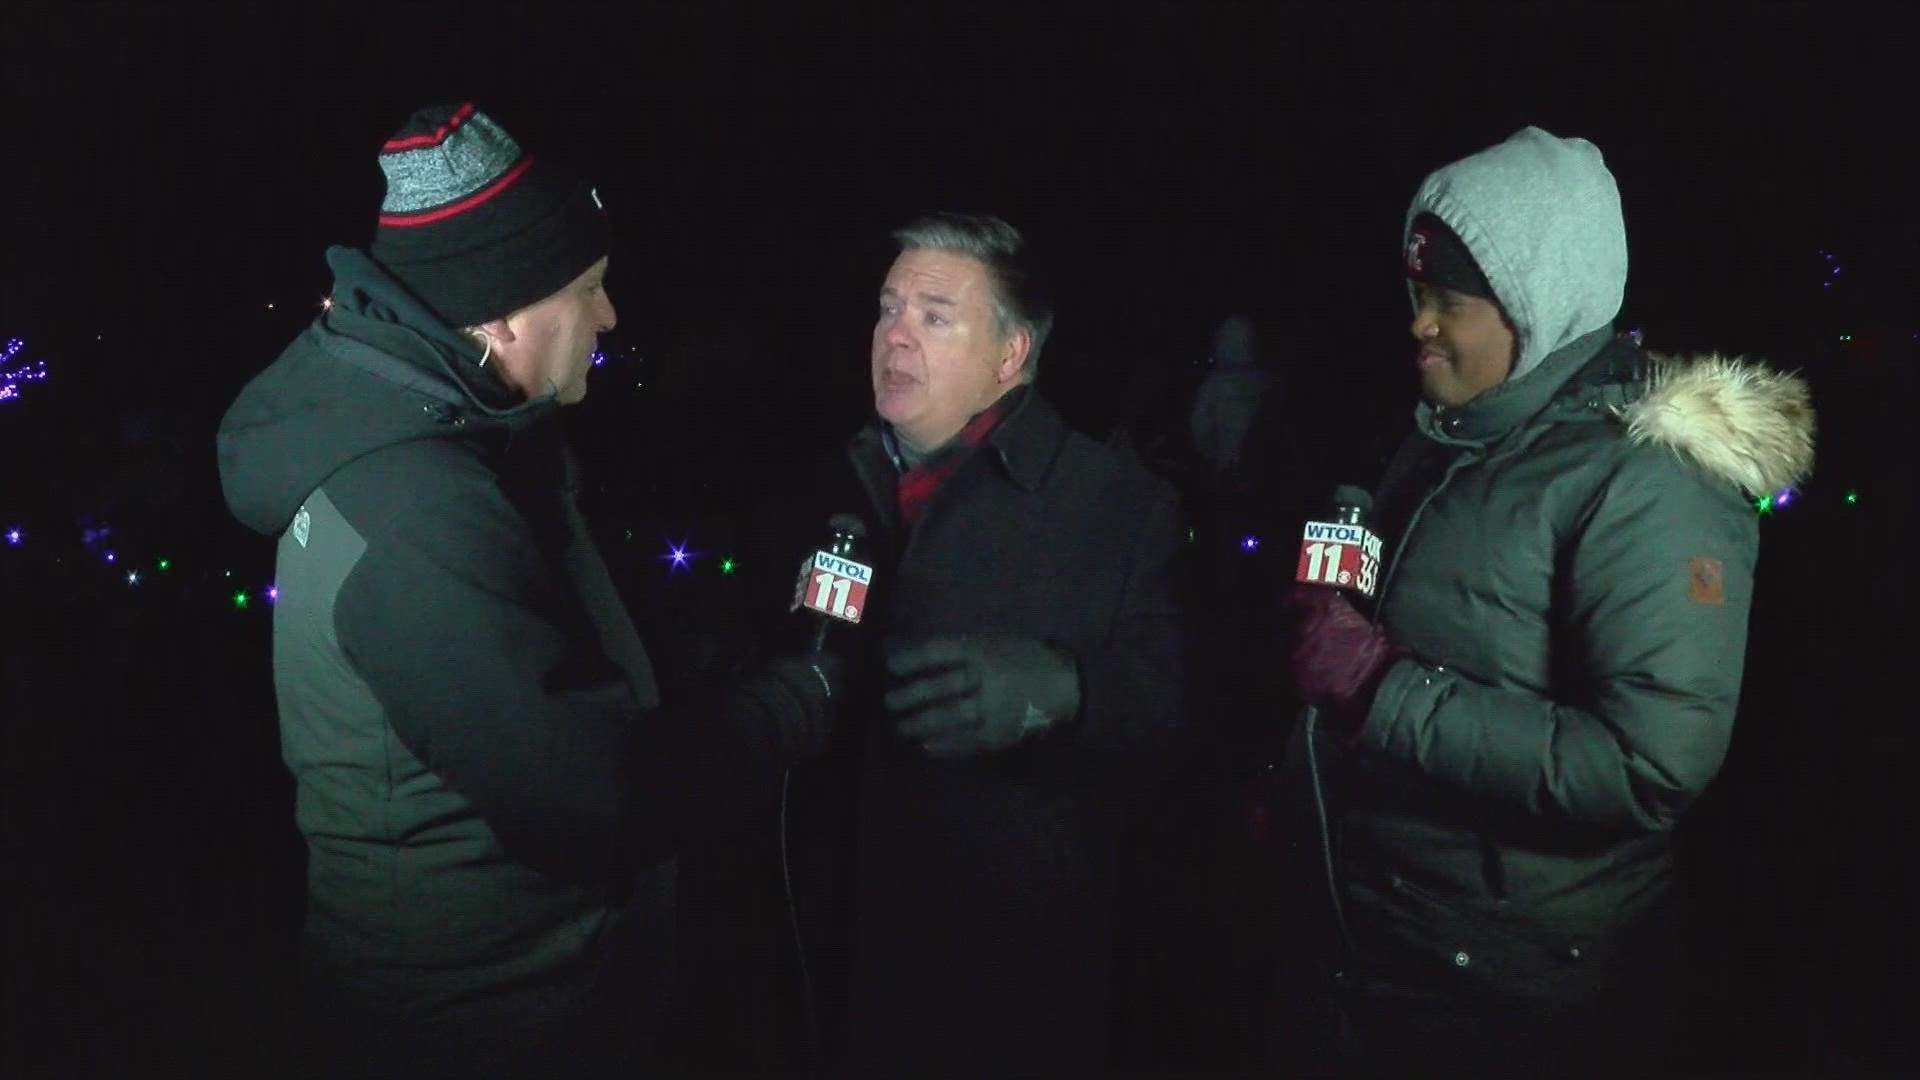 Representing event sponsor KeyBank, Mark Knierim talks about the Lights Before Christmas at the Toledo Zoo.